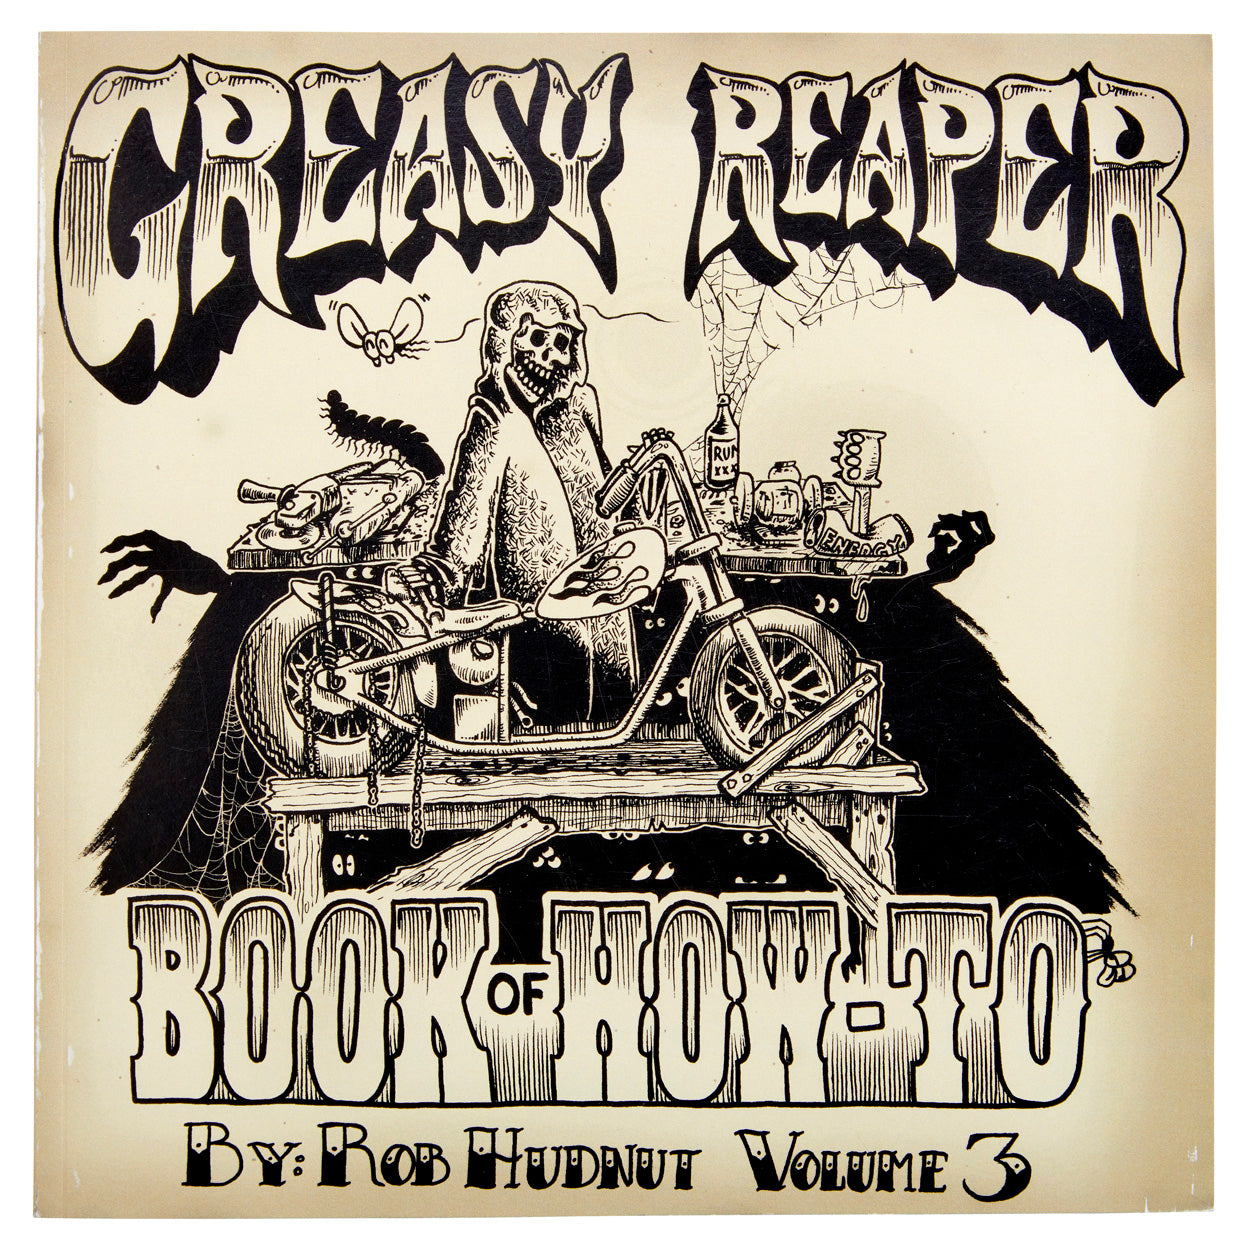 Greasy Reaper Book of How-To - Volume 3